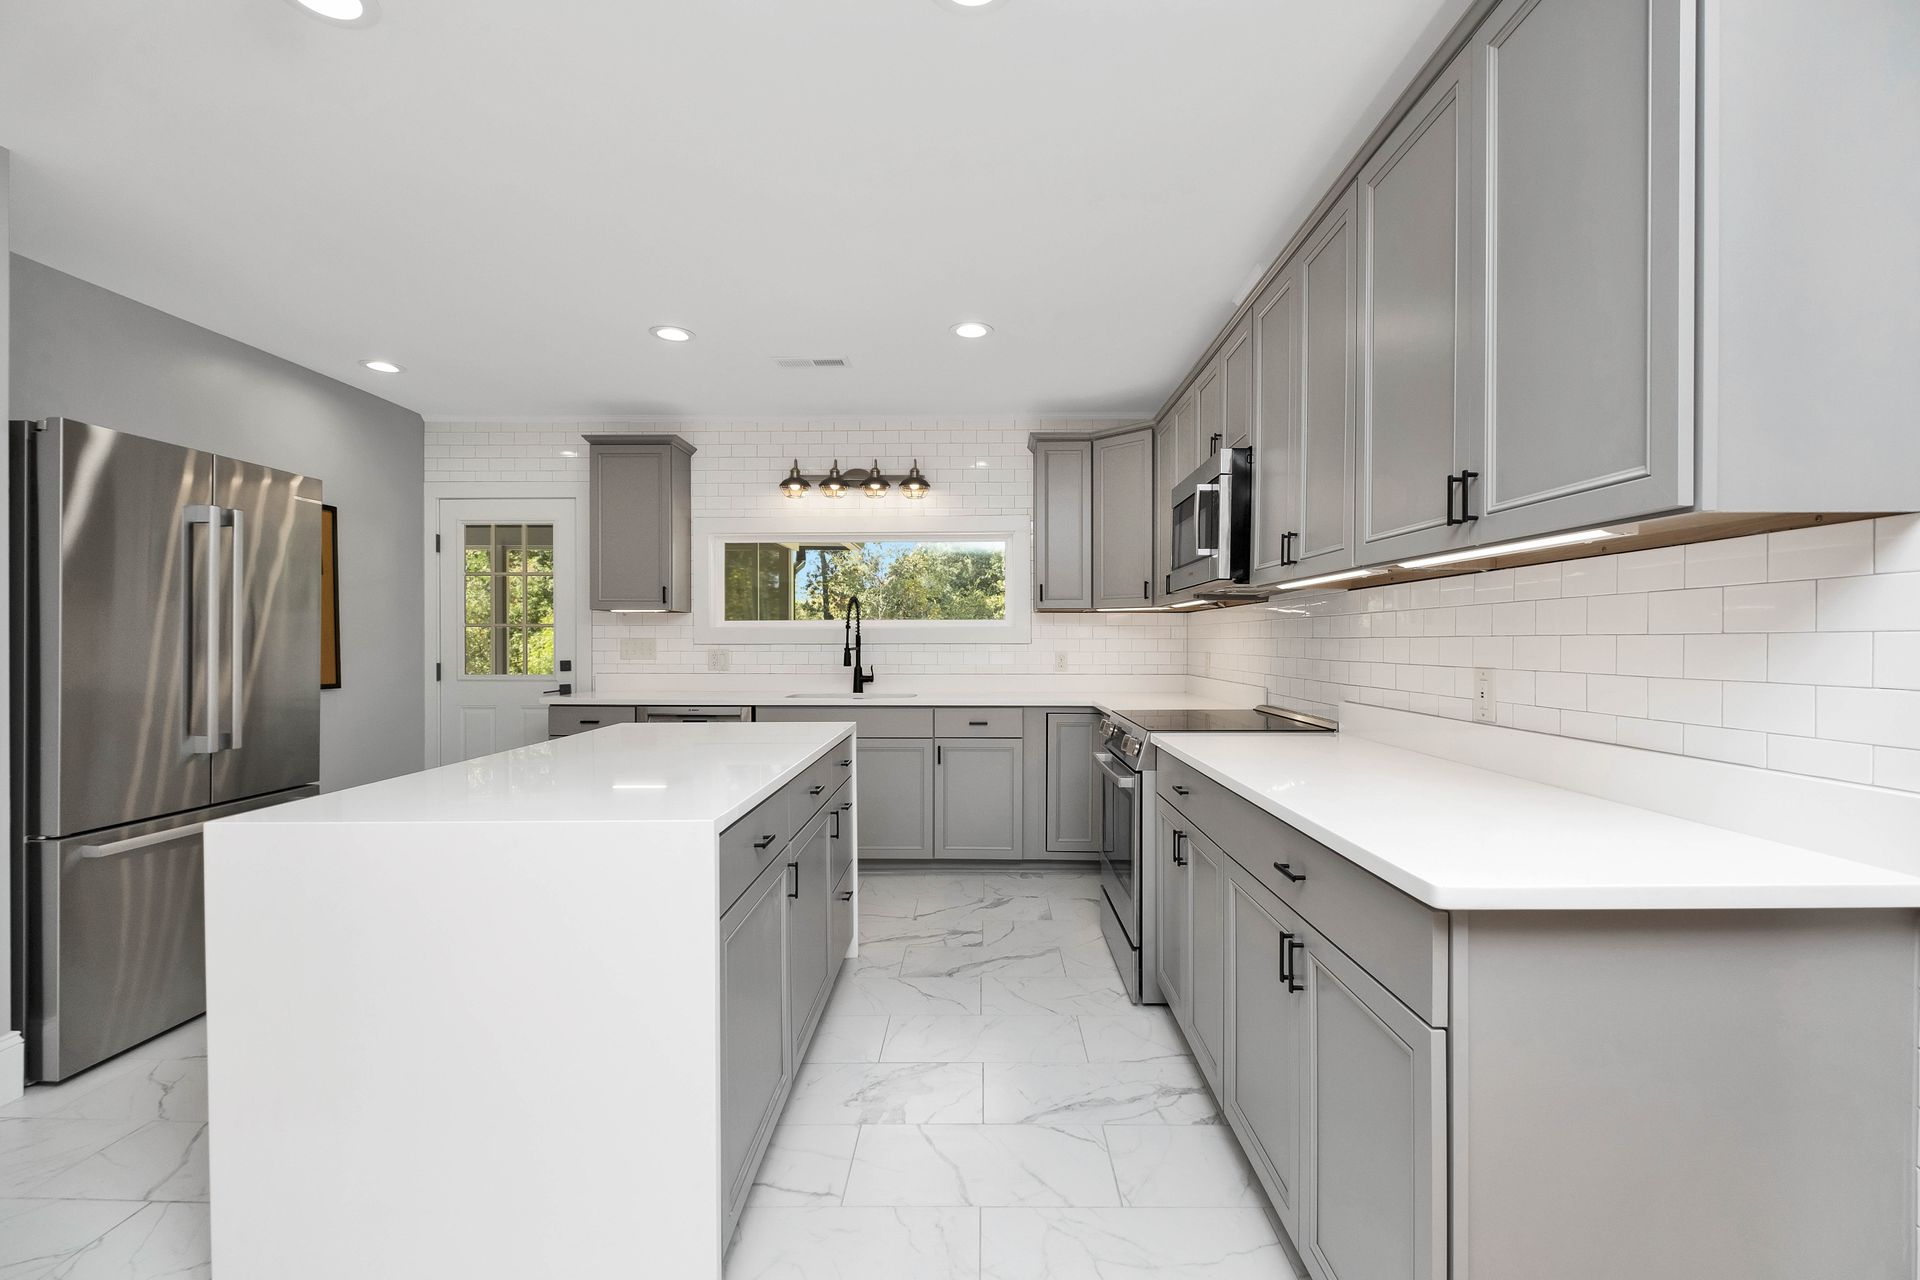 blog-post-header-imageExpert Kitchen Remodeling Tips: Design a Stunning and Functional Kitchen